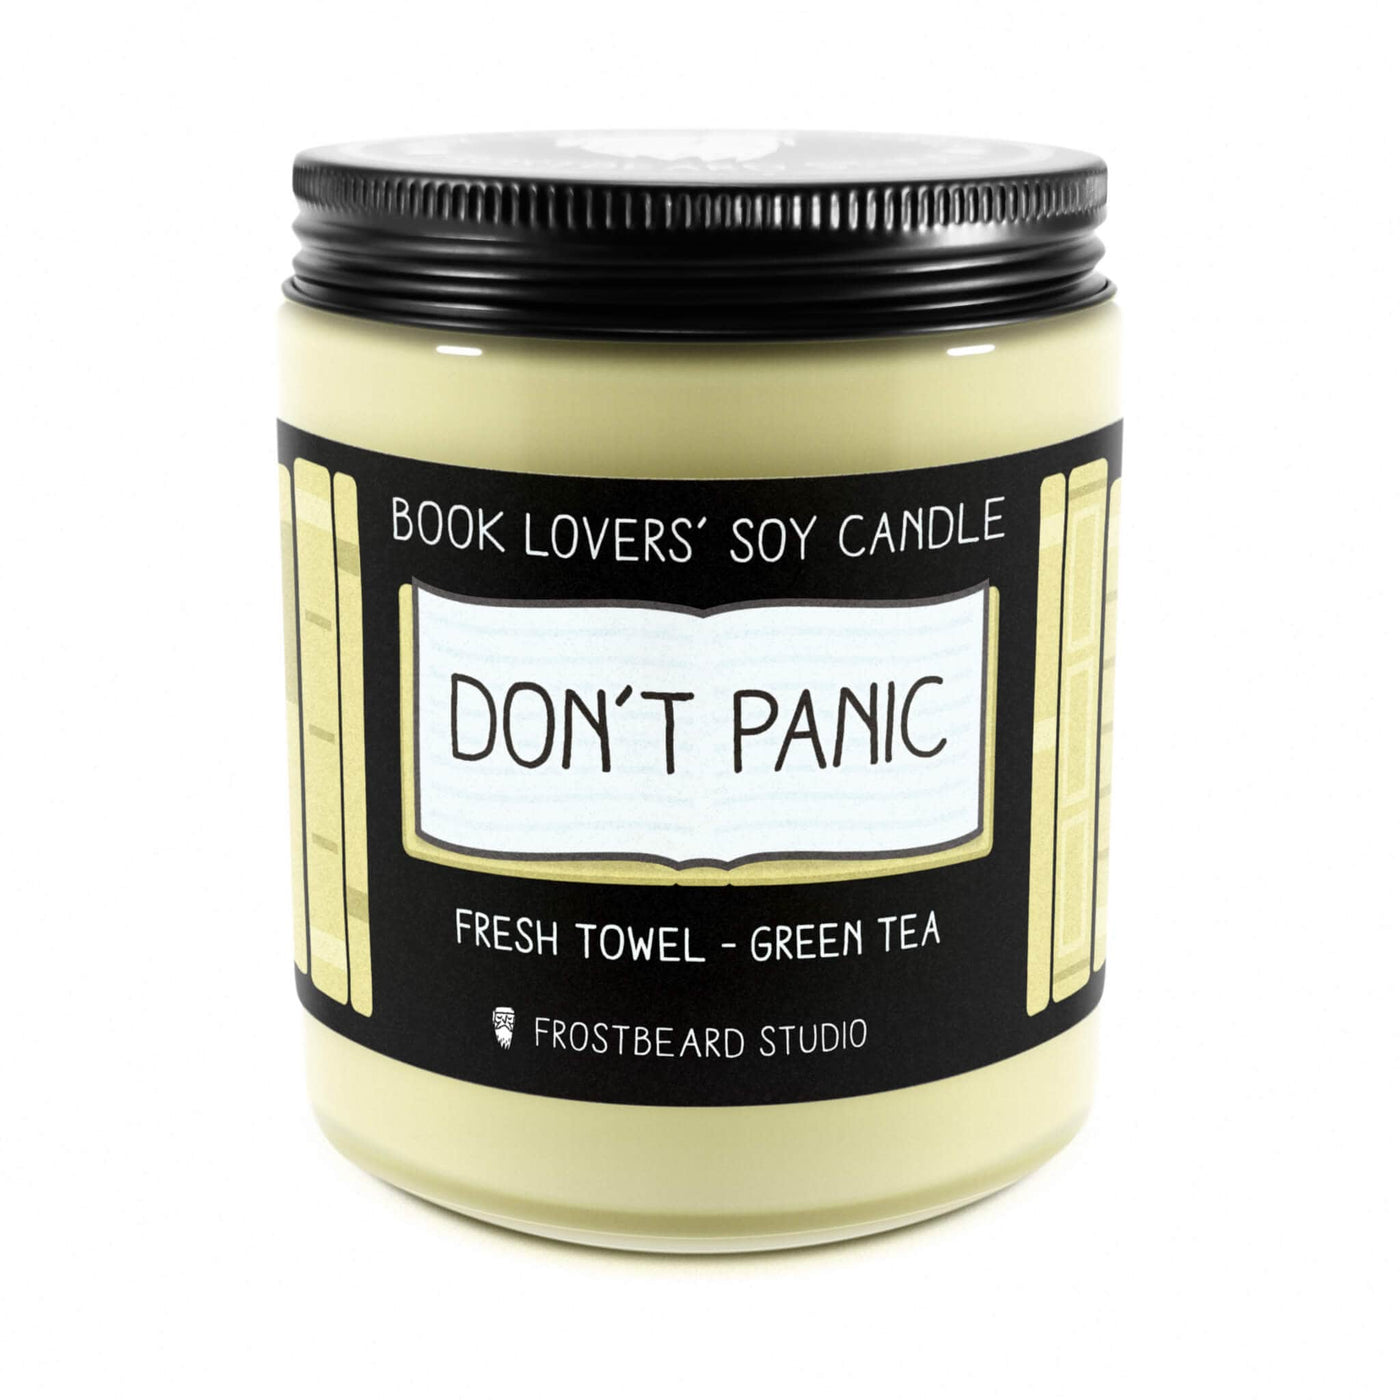 Don't Panic  -  8 oz Jar  -  Book Lovers' Soy Candle  -  Frostbeard Studio